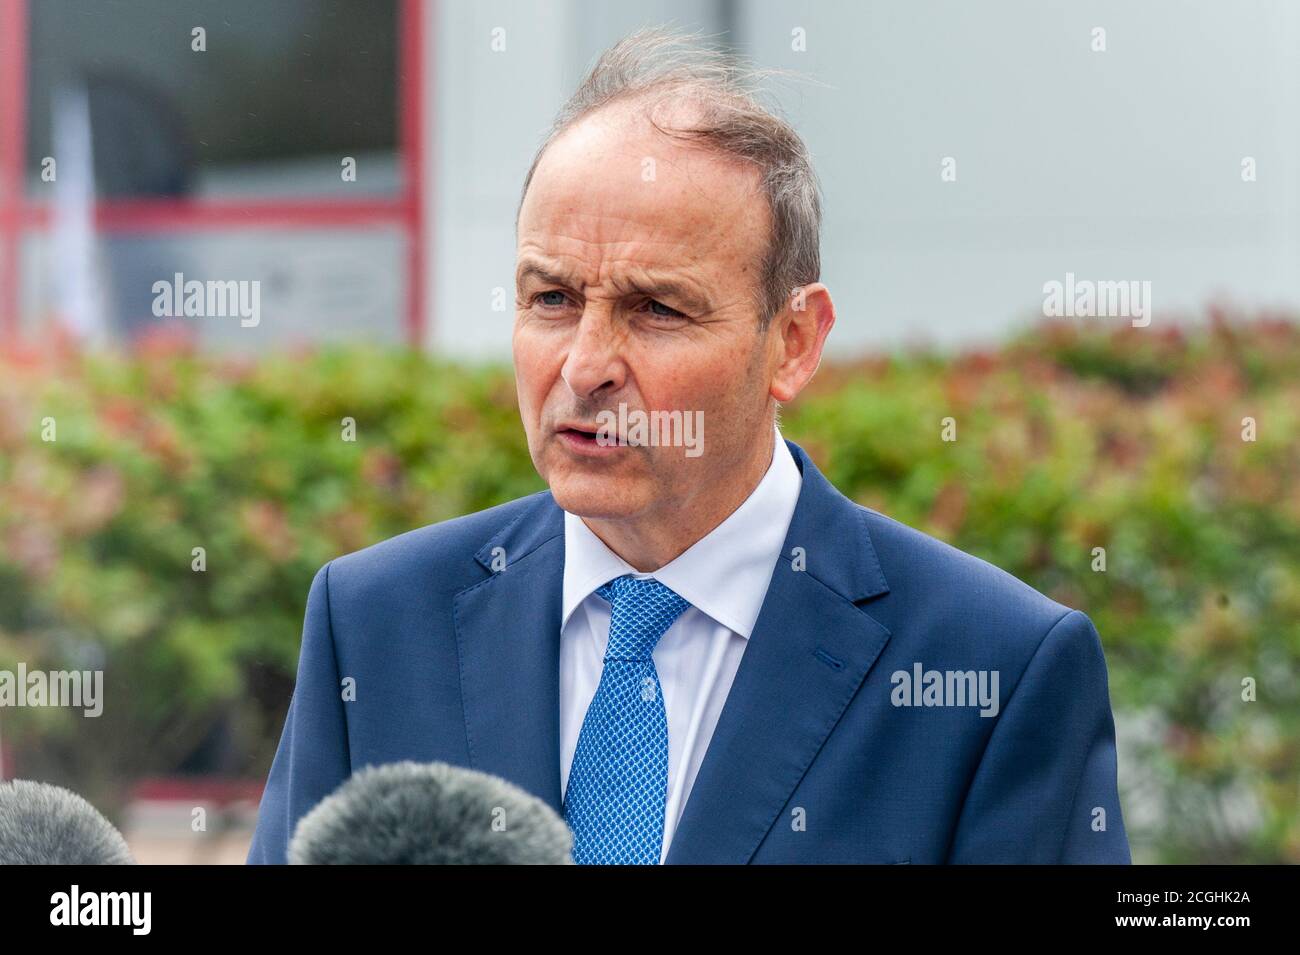 Clonakilty, West Cork, Ireland. 11th Sep, 2020. An Taoiseach Micheál Martin is visiting tech company Global Shares in Clonakilty today to announce the creation of 150 jobs within the business. Credit: AG News/Alamy Live News Stock Photo